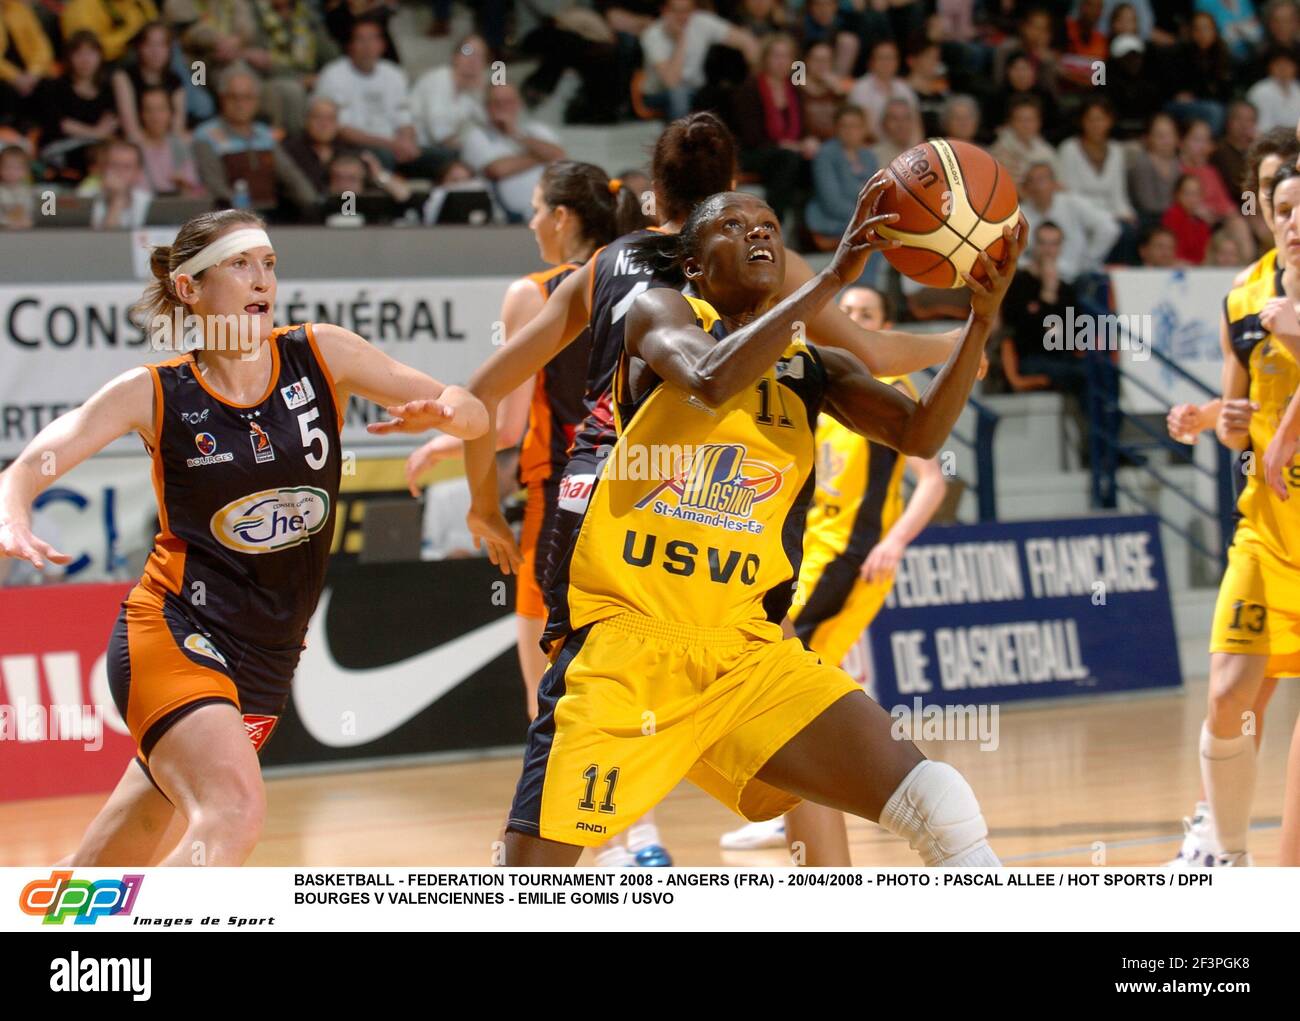 BASKETBALL - FEDERATION TOURNAMENT 2008 - ANGERS (FRA) - 20/04/2008 - PHOTO  : PASCAL ALLEE / HOT SPORTS / DPPI BOURGES V VALENCIENNES - EMILIE GOMIS /  USVO Stock Photo - Alamy